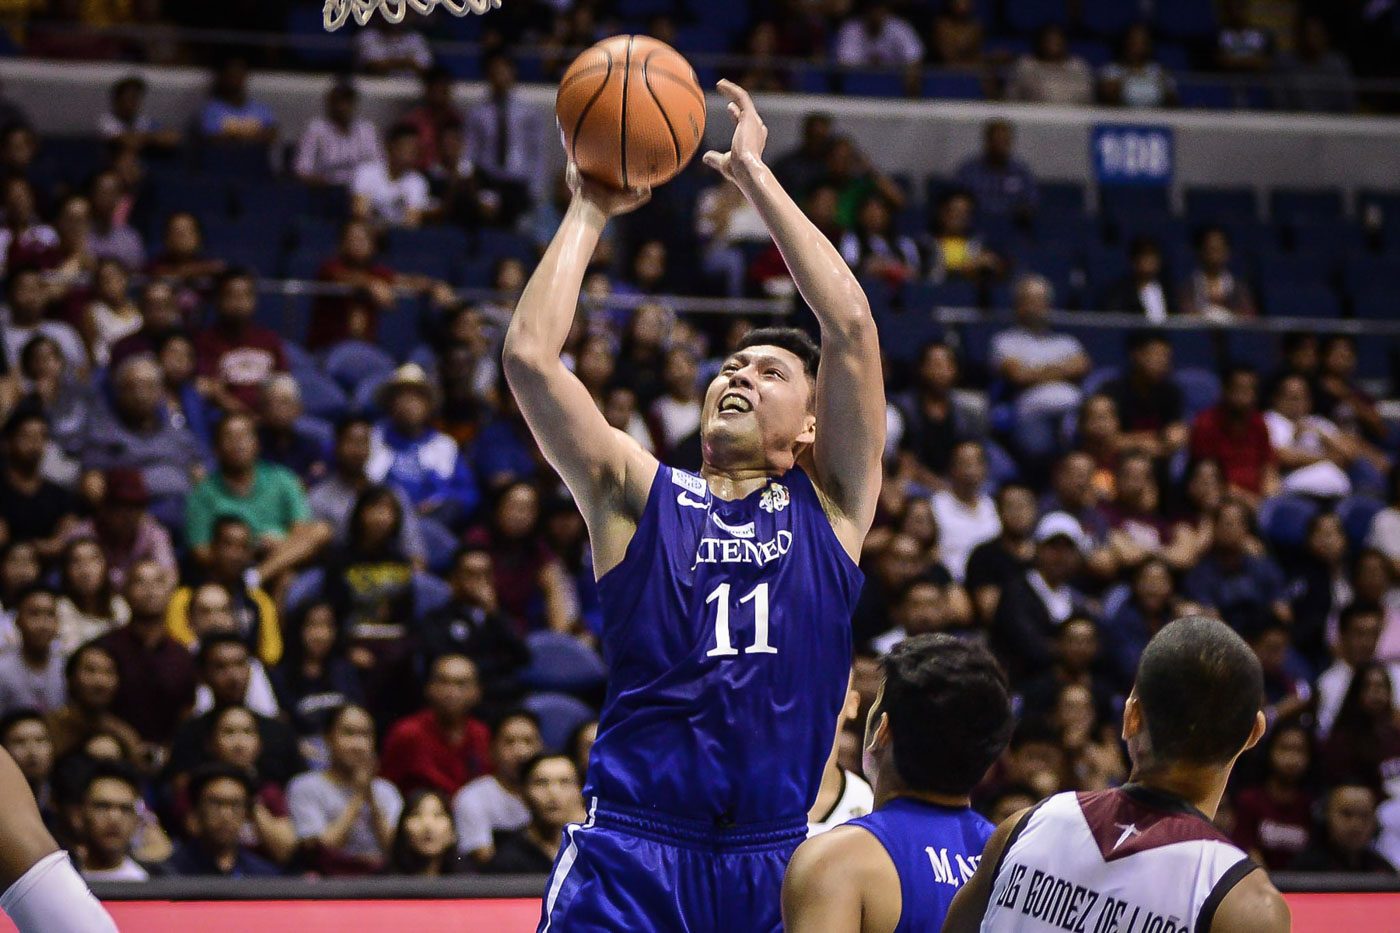 Blue Eagles lock down the Fighting Maroons to remain undefeated